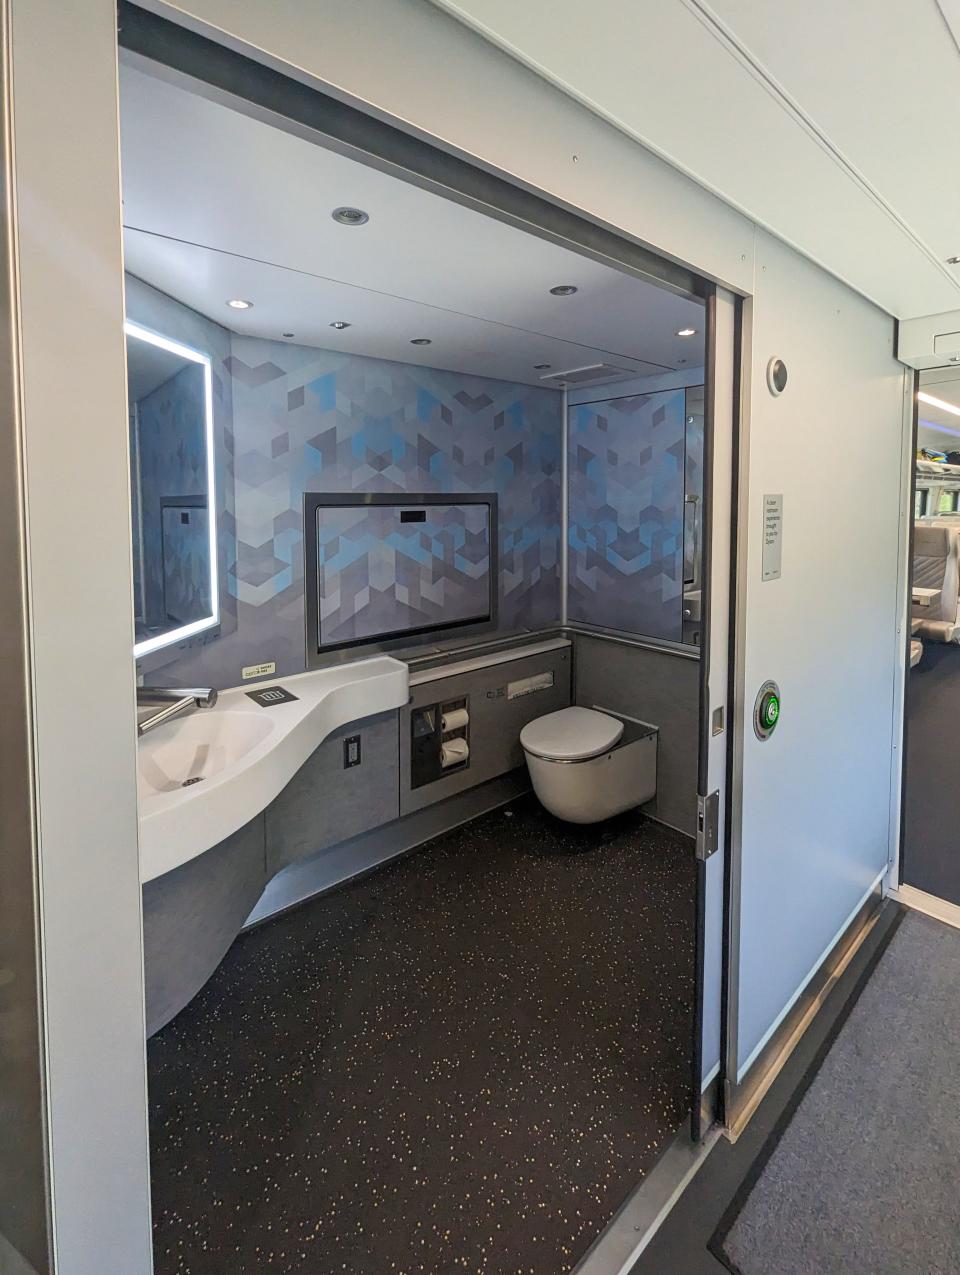 A spacious train restroom in shades of blue and gray is shown.